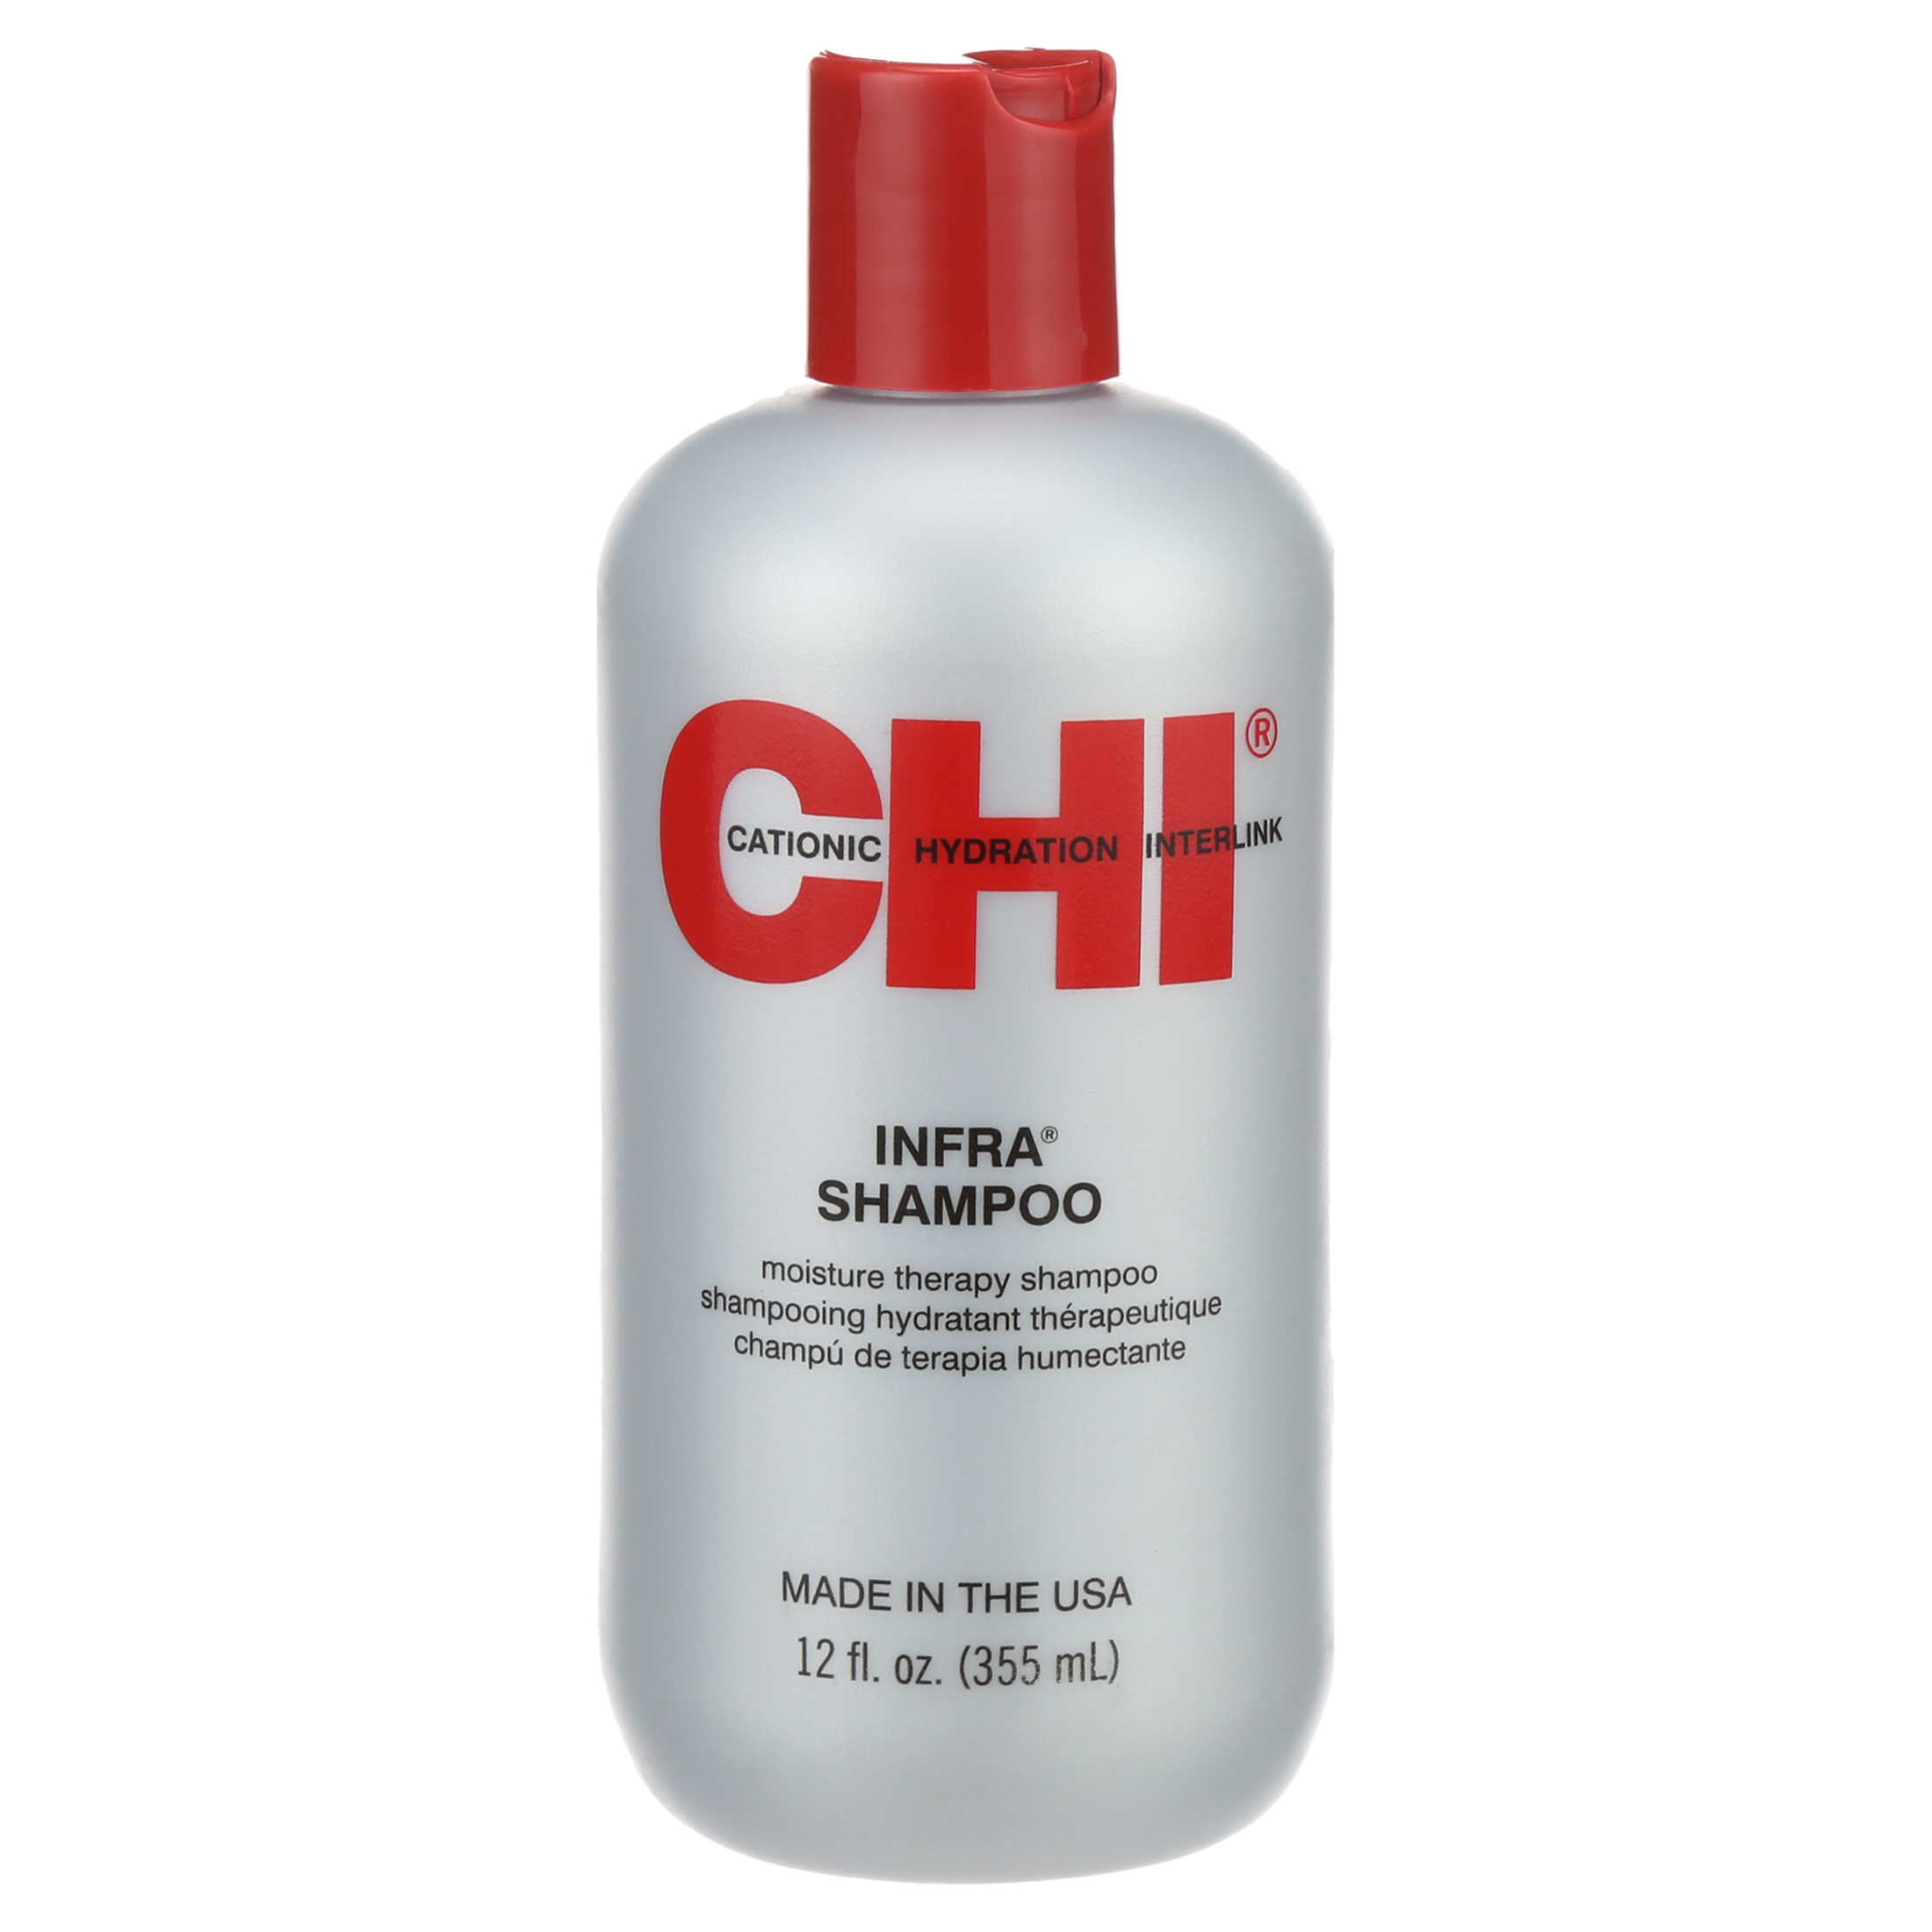 CHI Infra Moisture Therapy Shampoo 12 oz - image 2 of 7